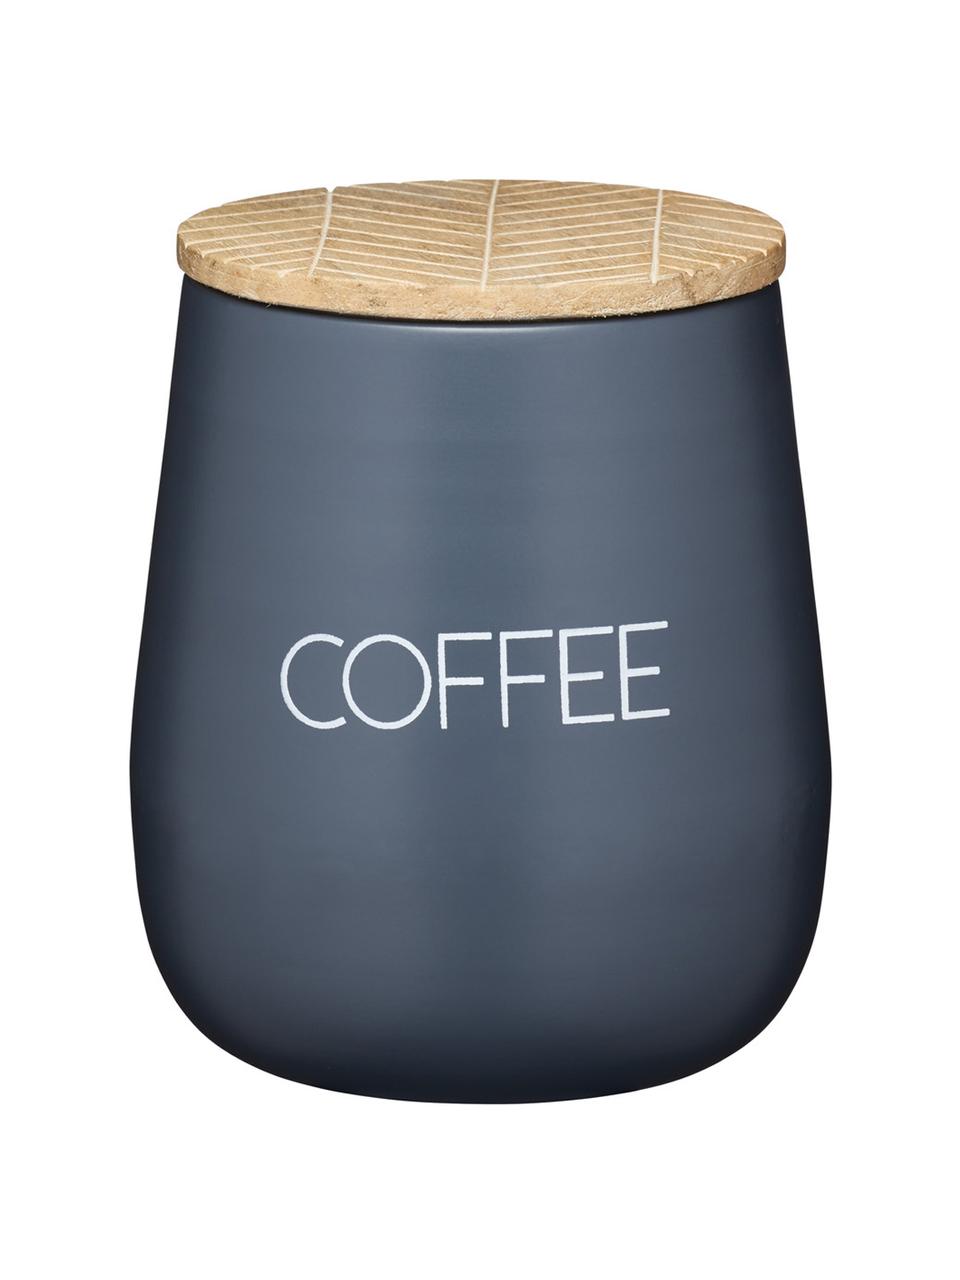 Opbergpot Serenity Coffee, Staal, hout, Antraciet, houtkleurig, Ø 13 x H 15 cm, 1,6 L